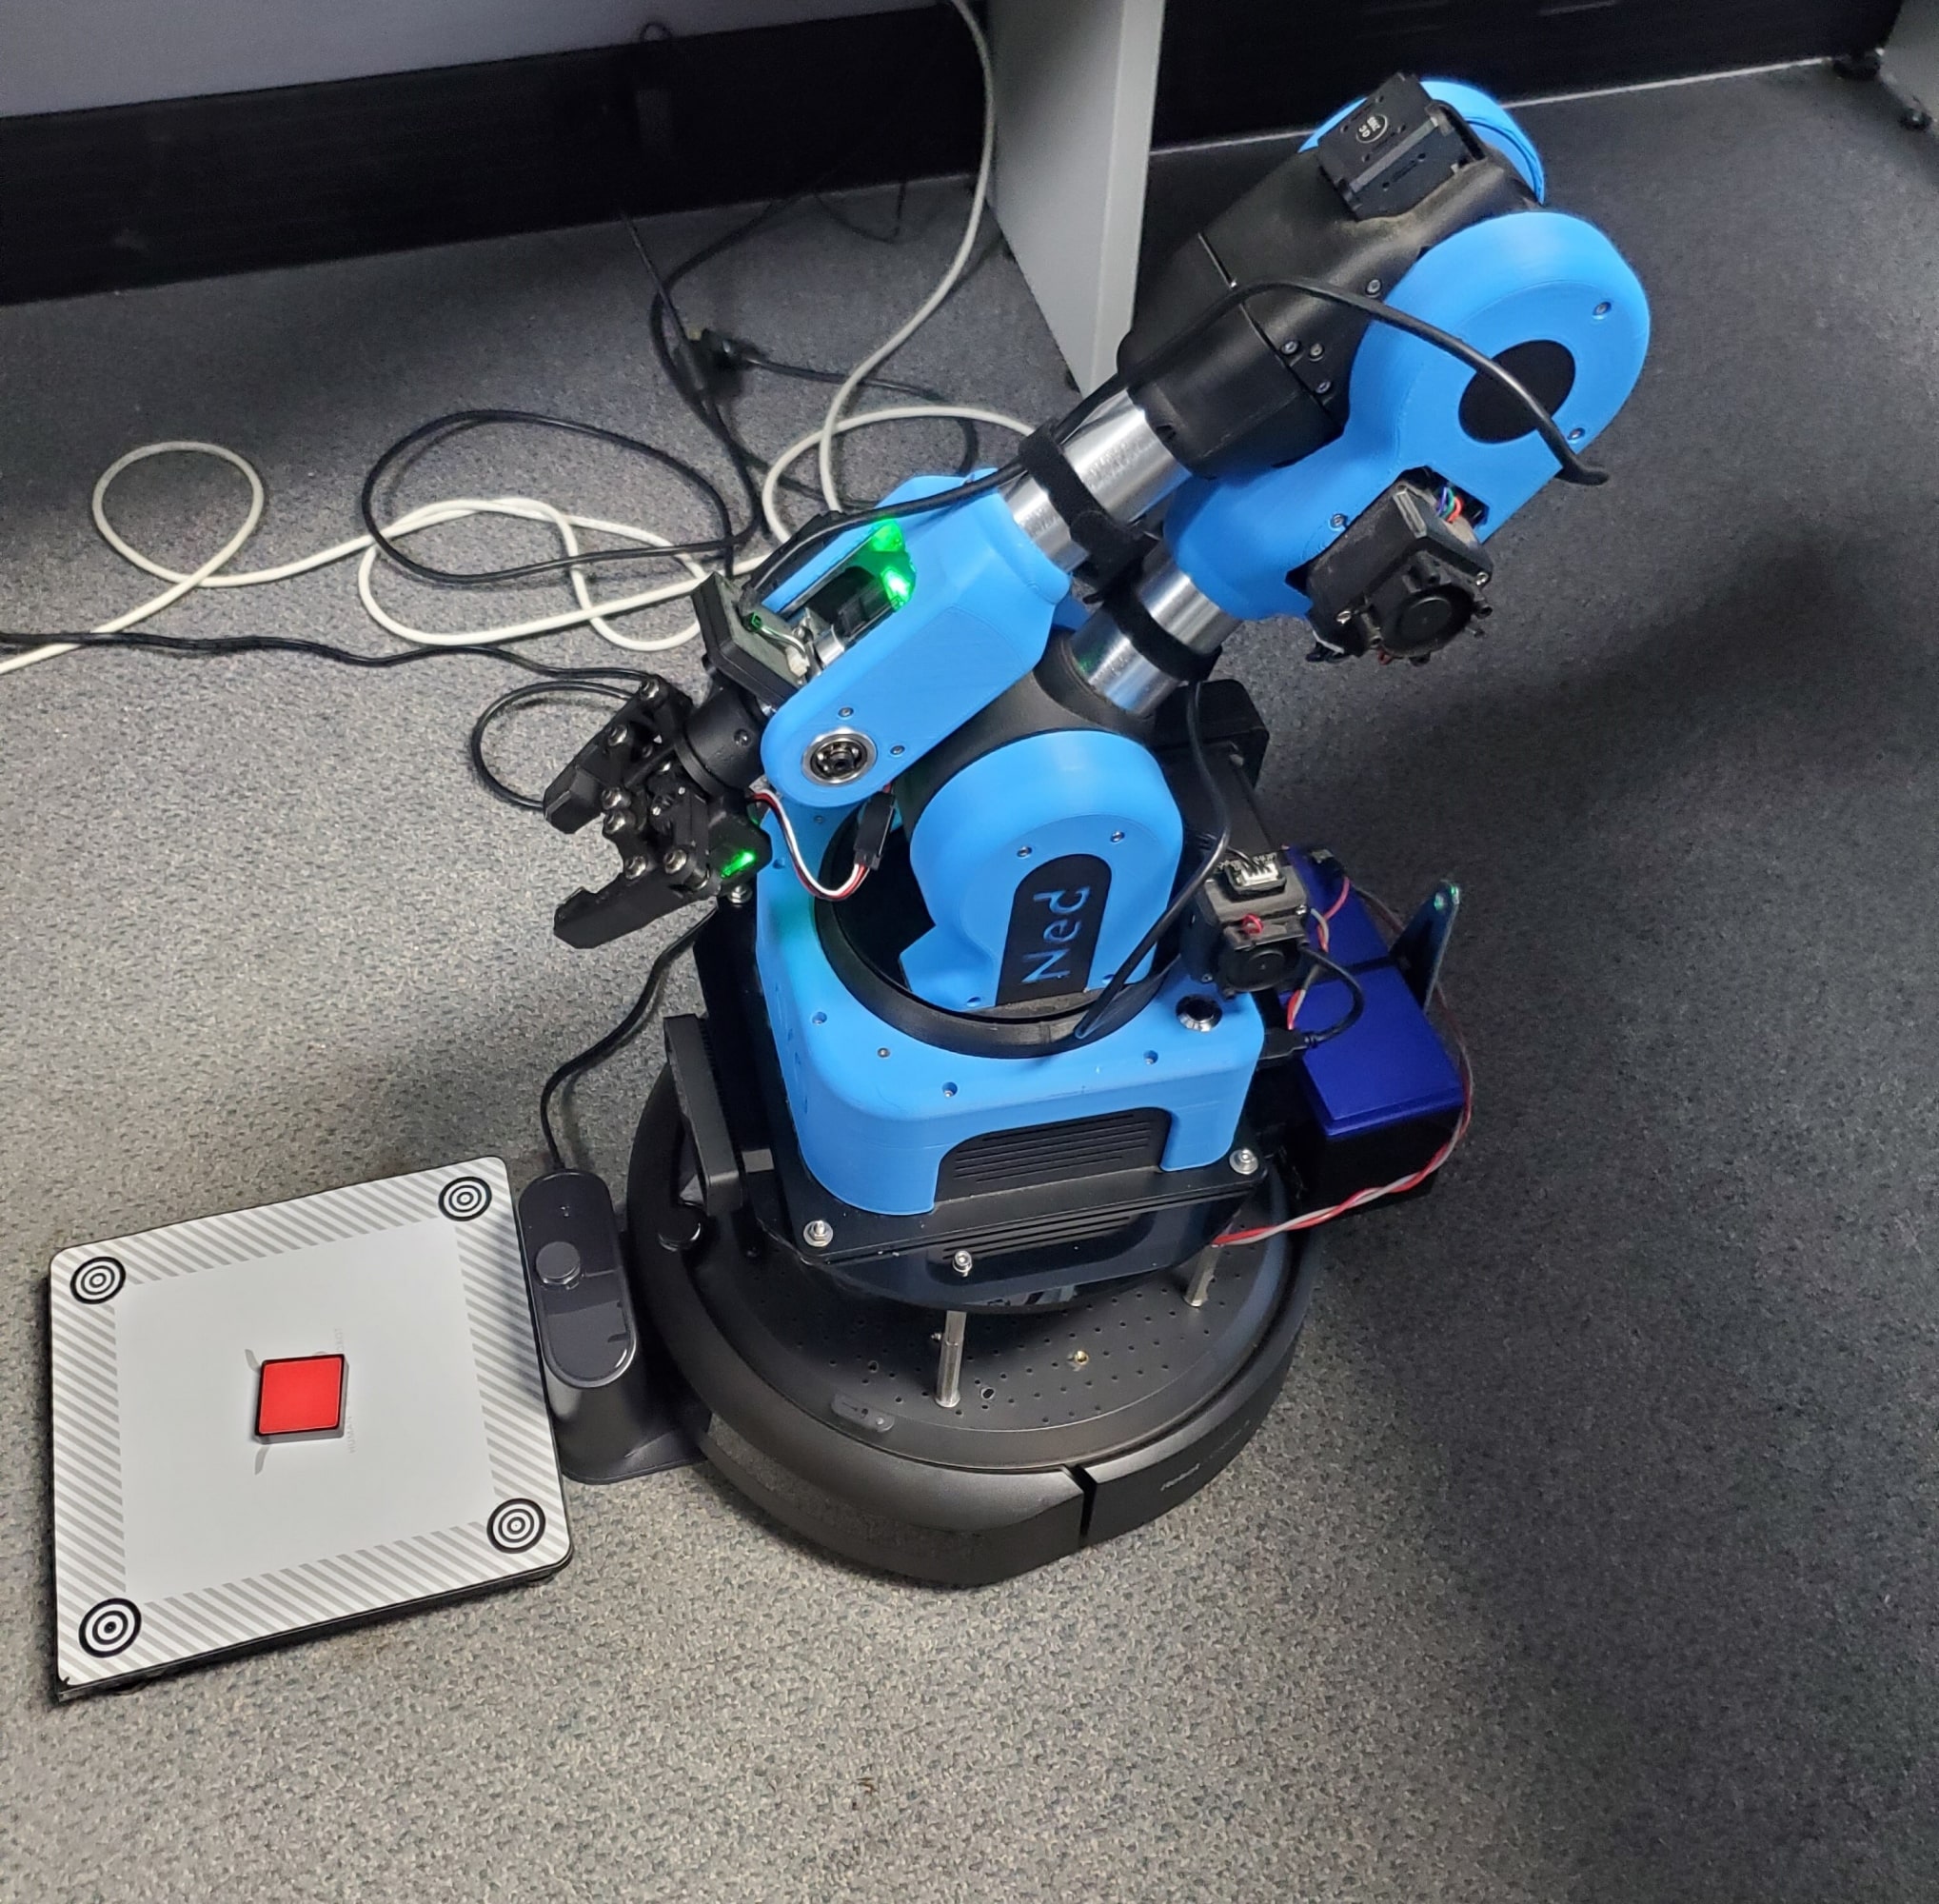 TurtleBot4 with NED2 iso